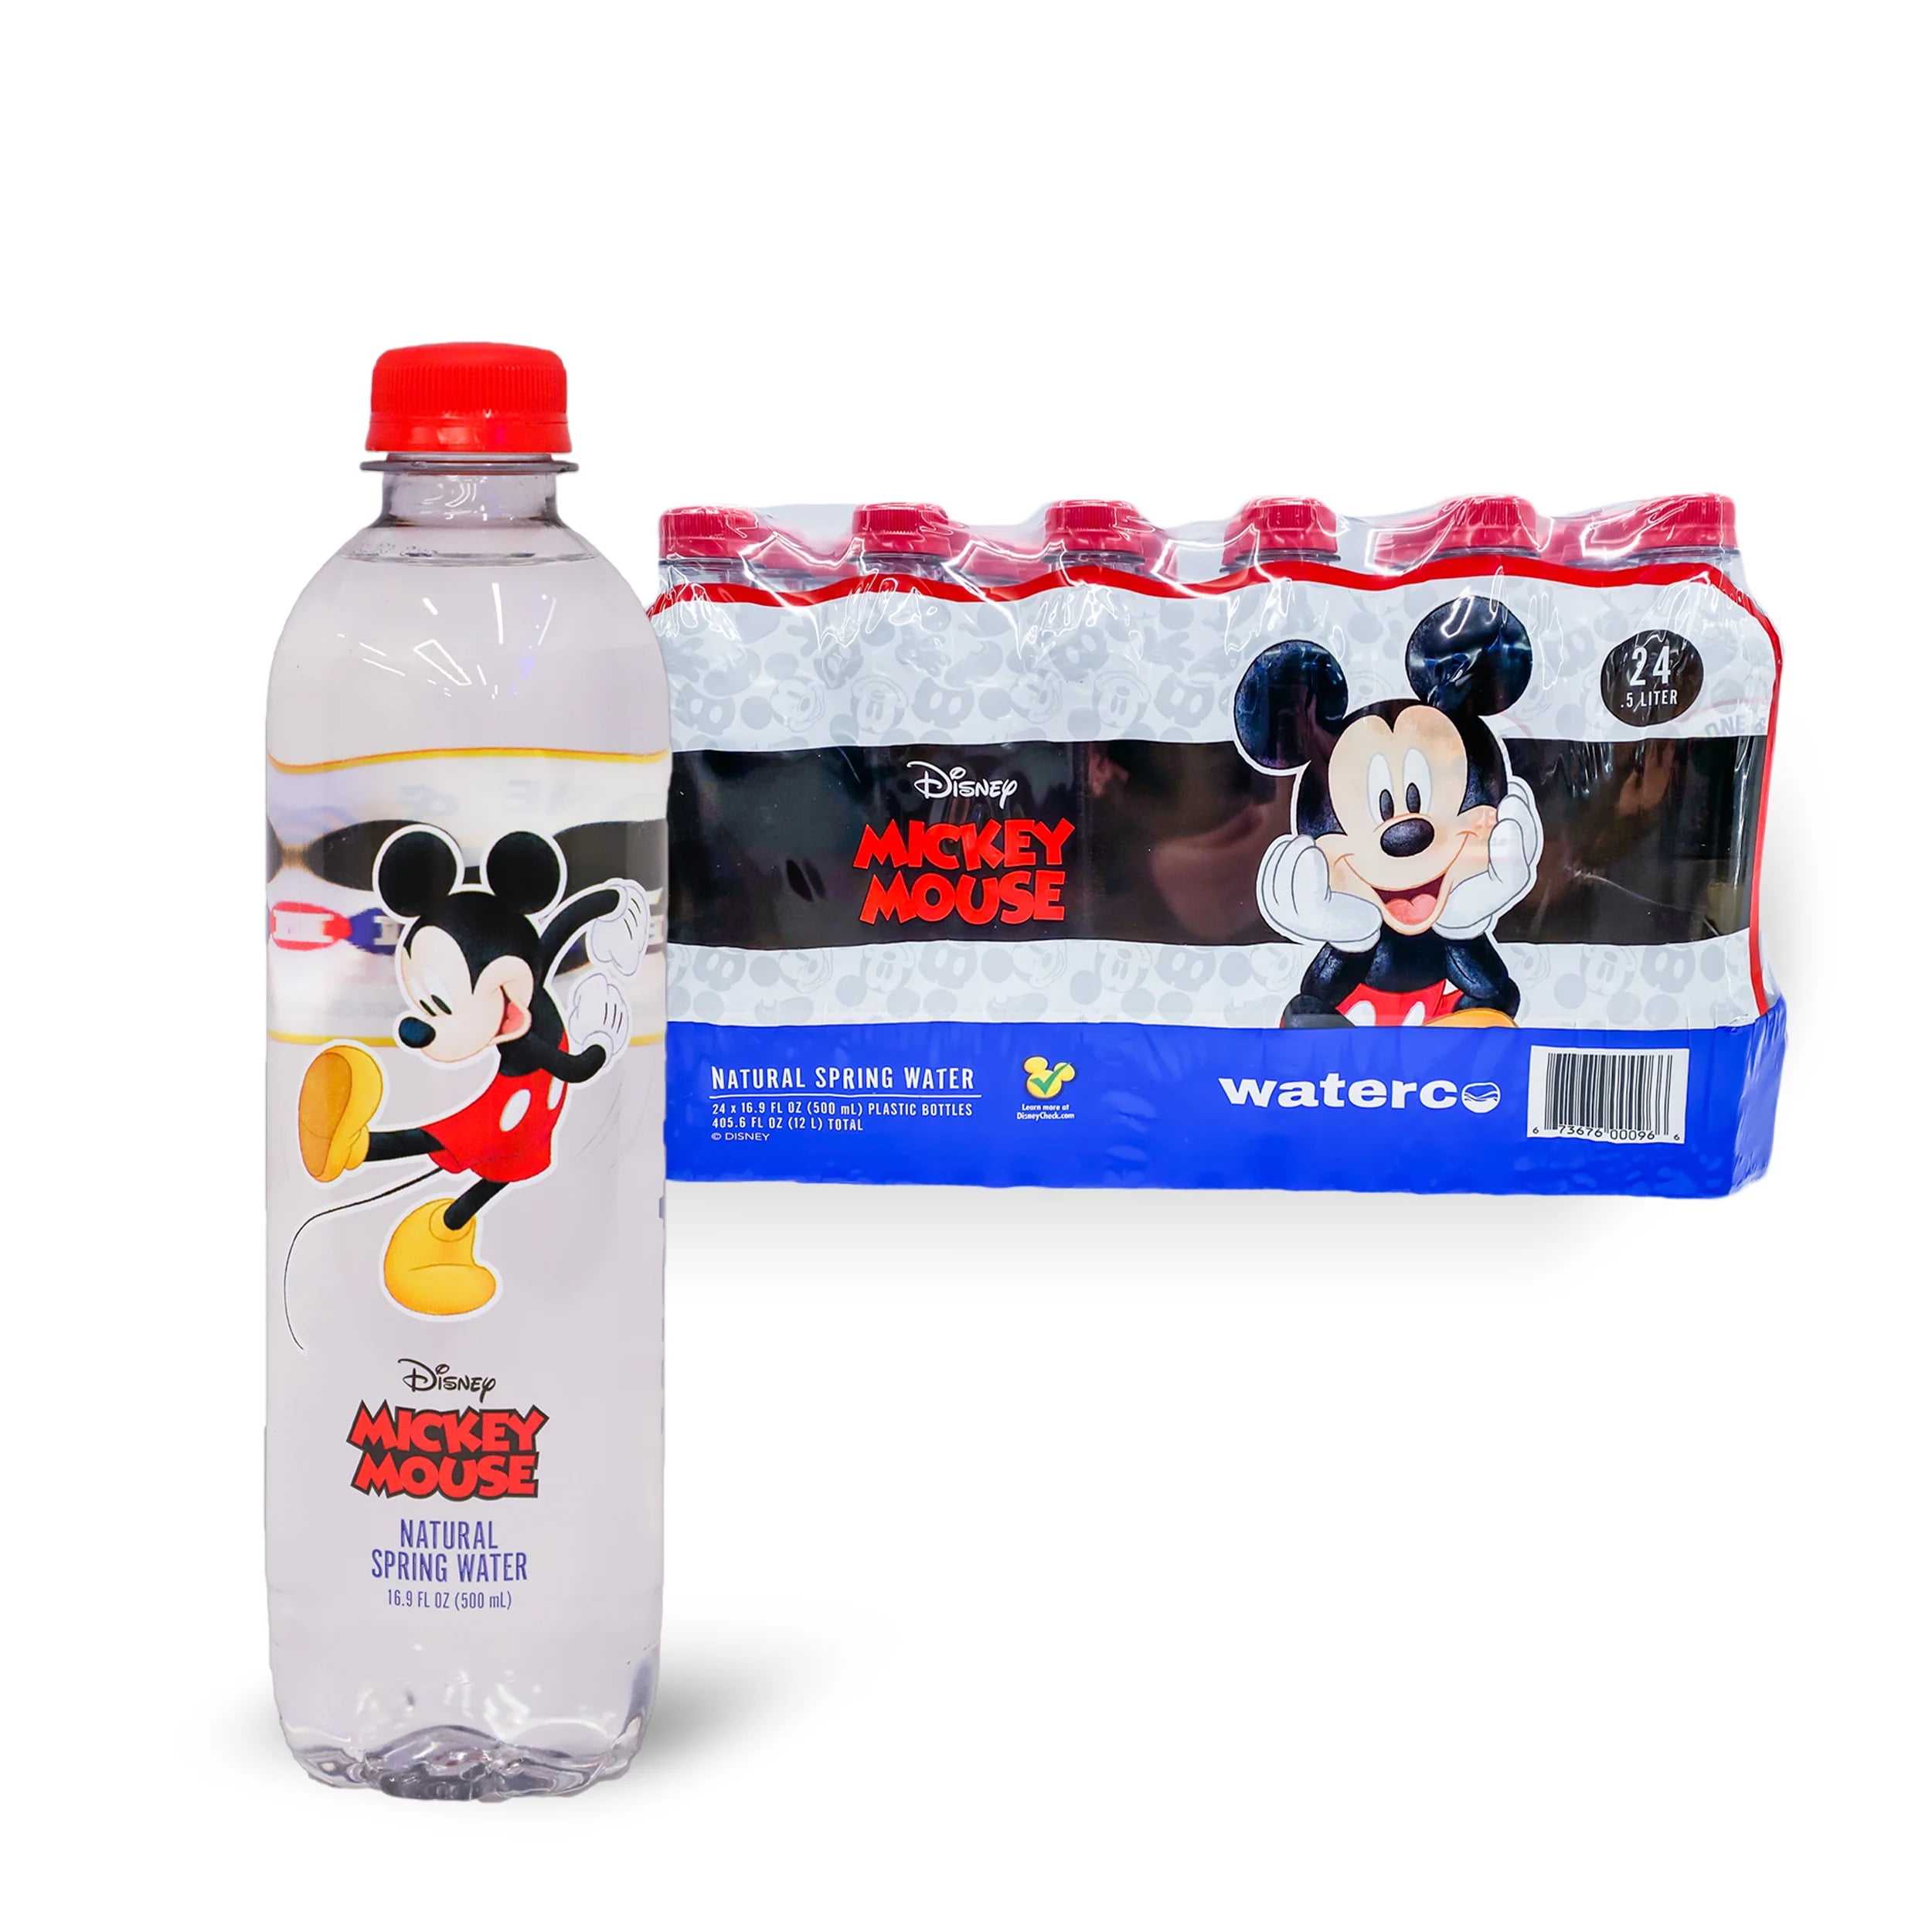 Disney Mickey Mouse Bottled Water - Naturally Filtered Spring Water in 16.9  Fl Ounce PET Plastic Bottles, Recyclable and BPA-Free, Case of 24, by